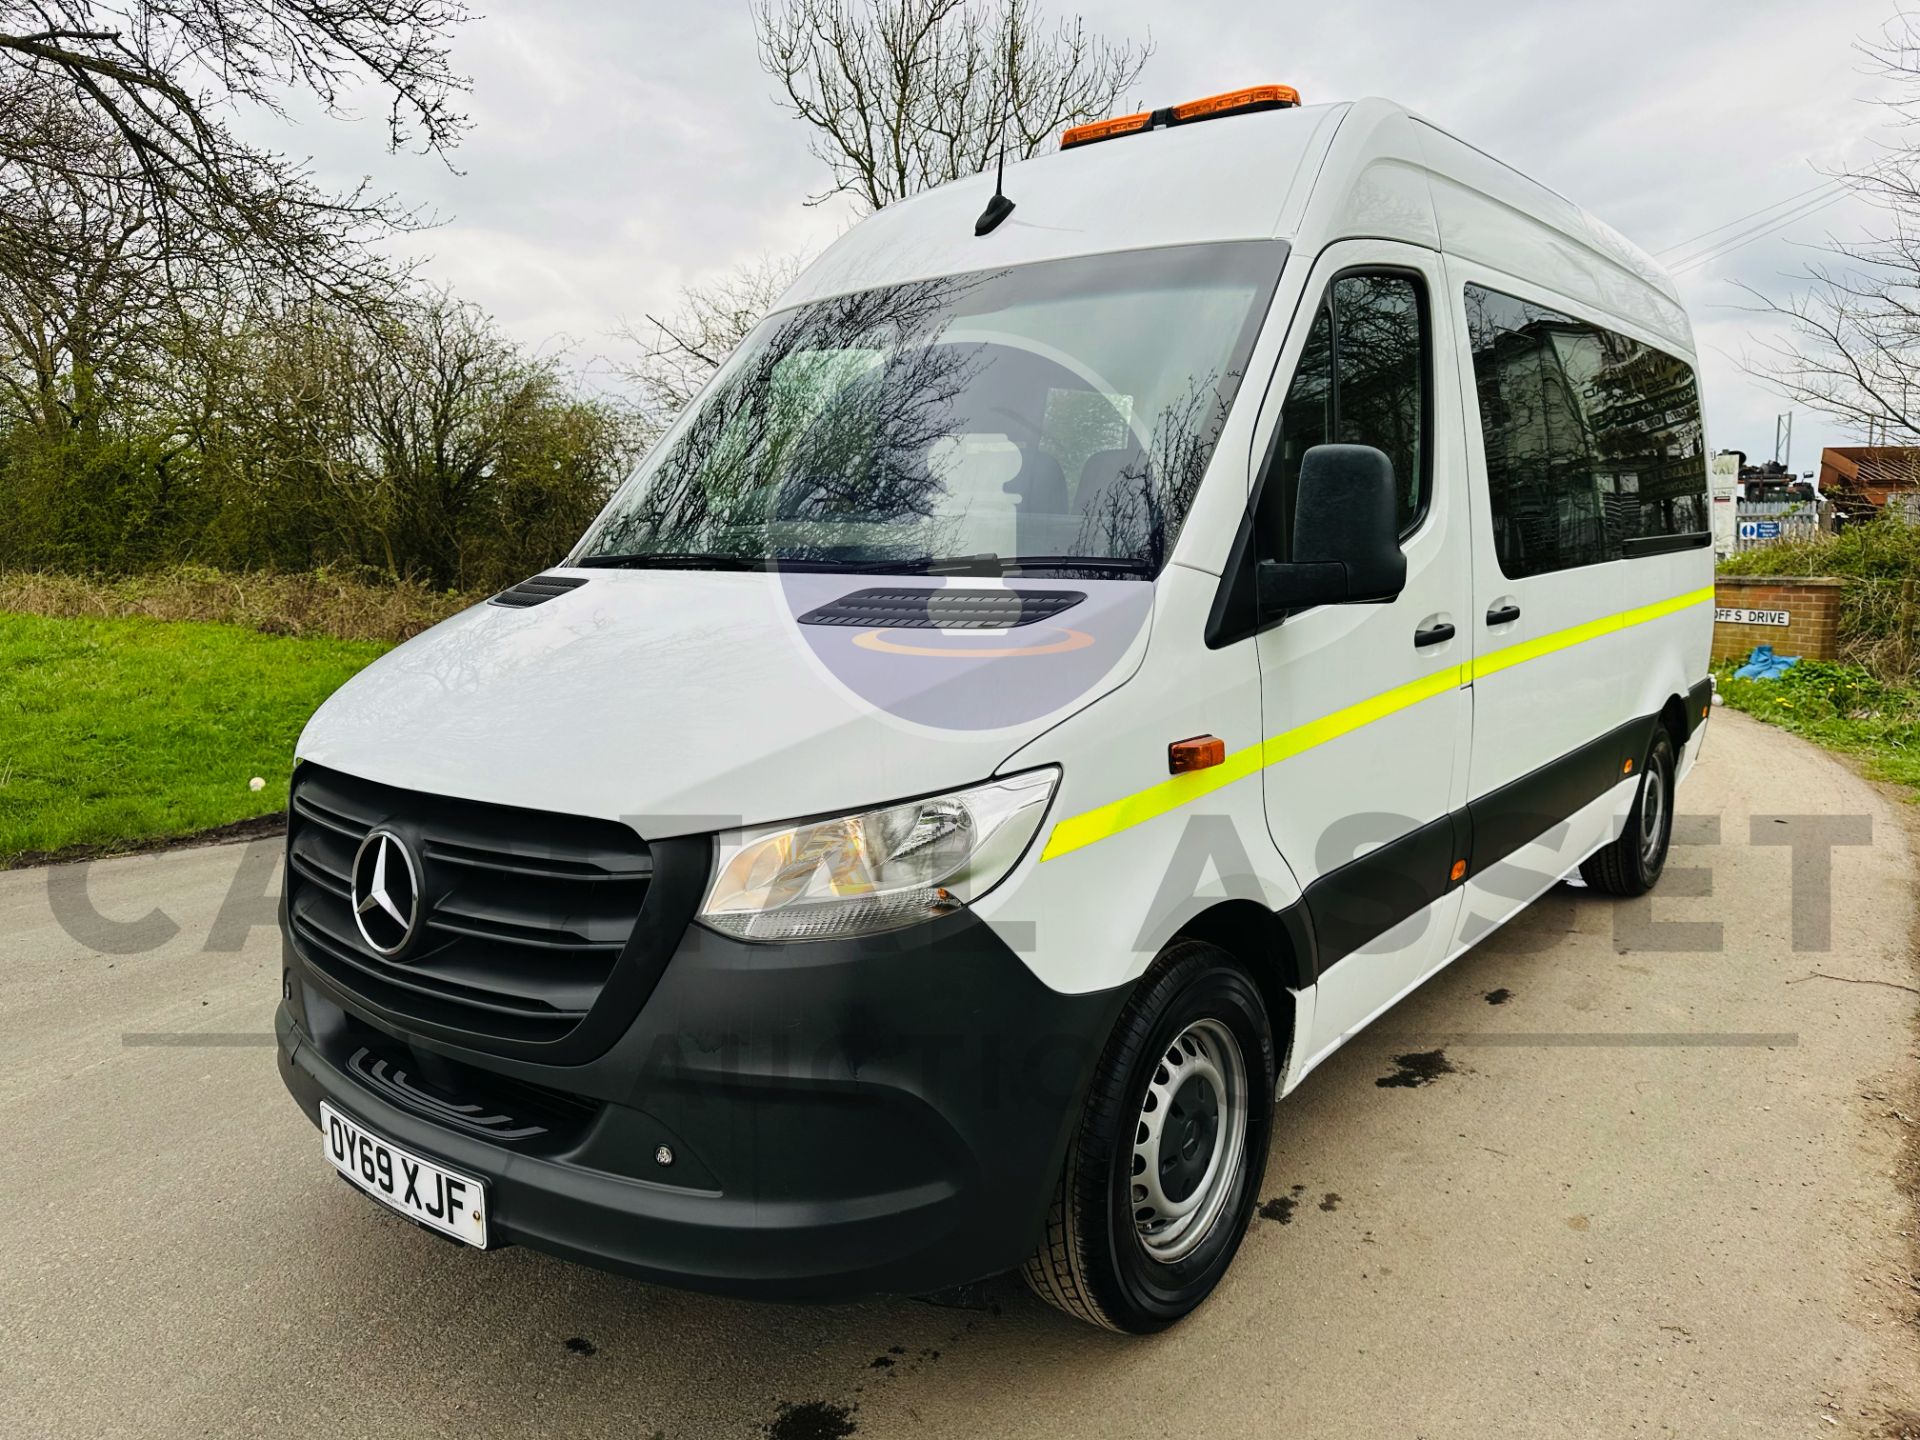 (ON SALE) MERCEDES SPRINTER 314CDI AUTO MWB MESSING UNIT WITH W/C,MICROWAVE,- 2020 REG- - AIR CON - Image 4 of 44